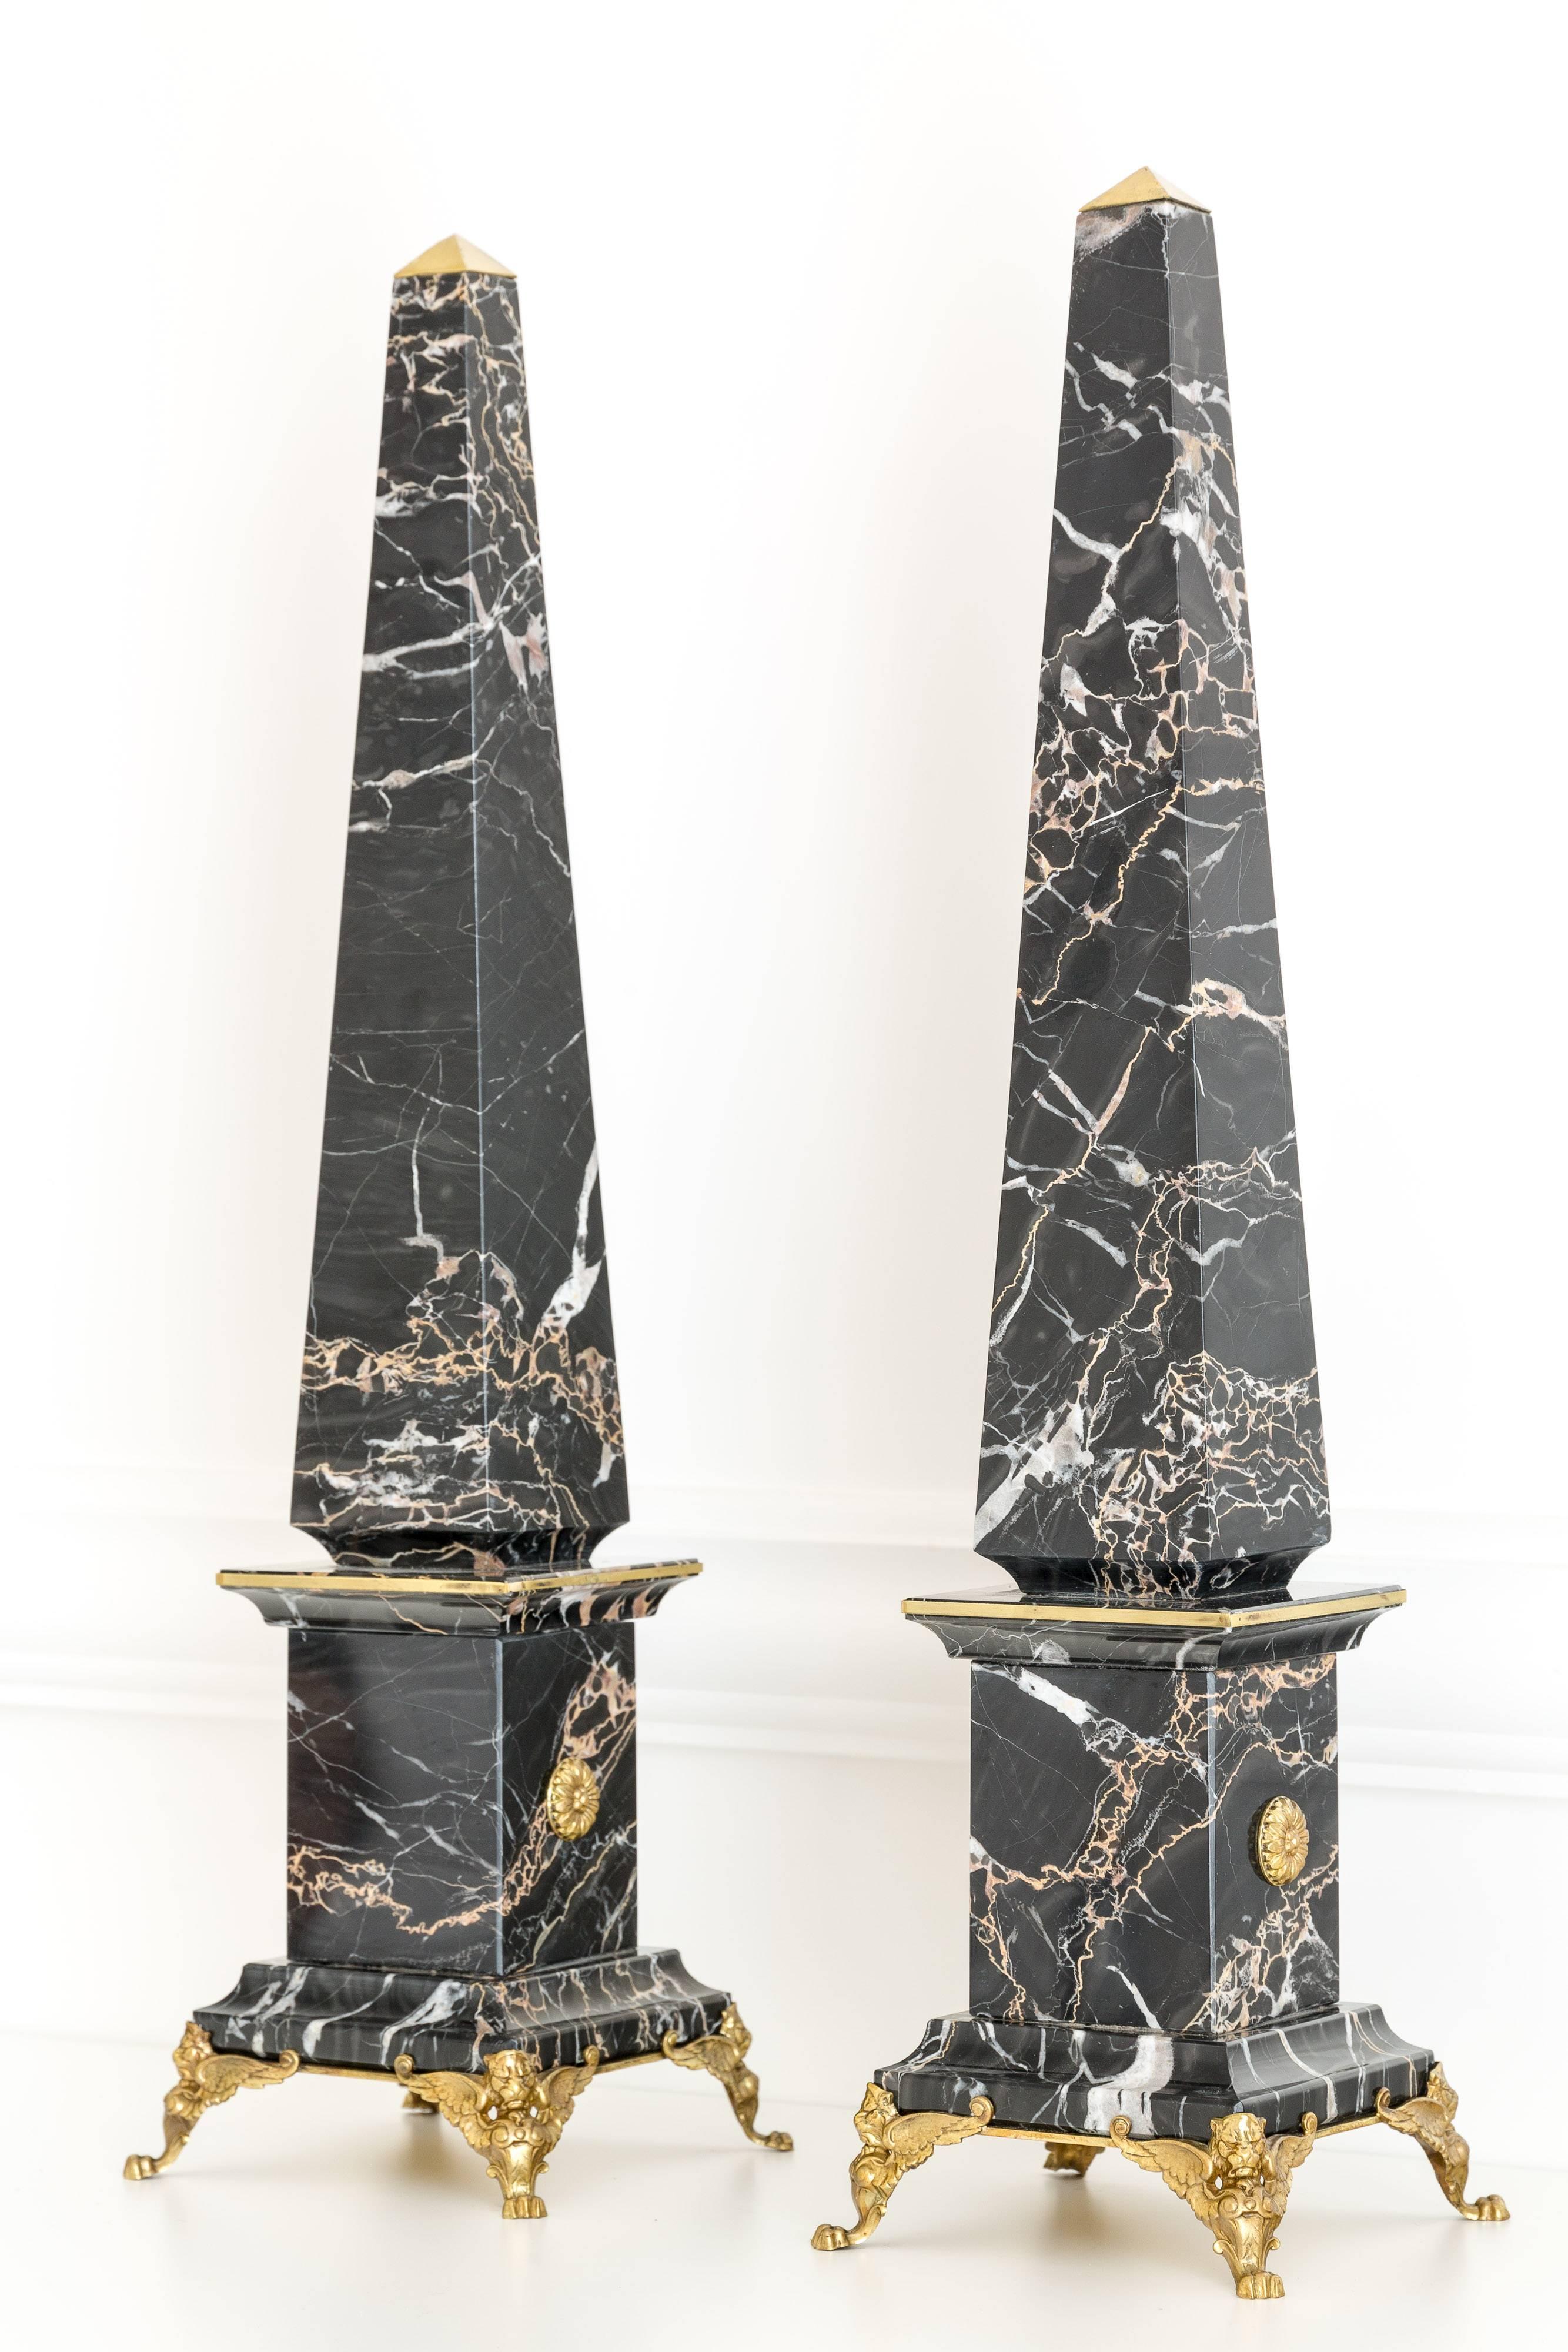 pair of italian portoro marble and bronze obelisks,GOLD LION  -grand tour collection- produced by Lorenzo Ciompi, 2017 
designed, produced and executed directly in exclusivity for COMPENDIO GALLERY on limited edition of 10 
extremely rare portoro